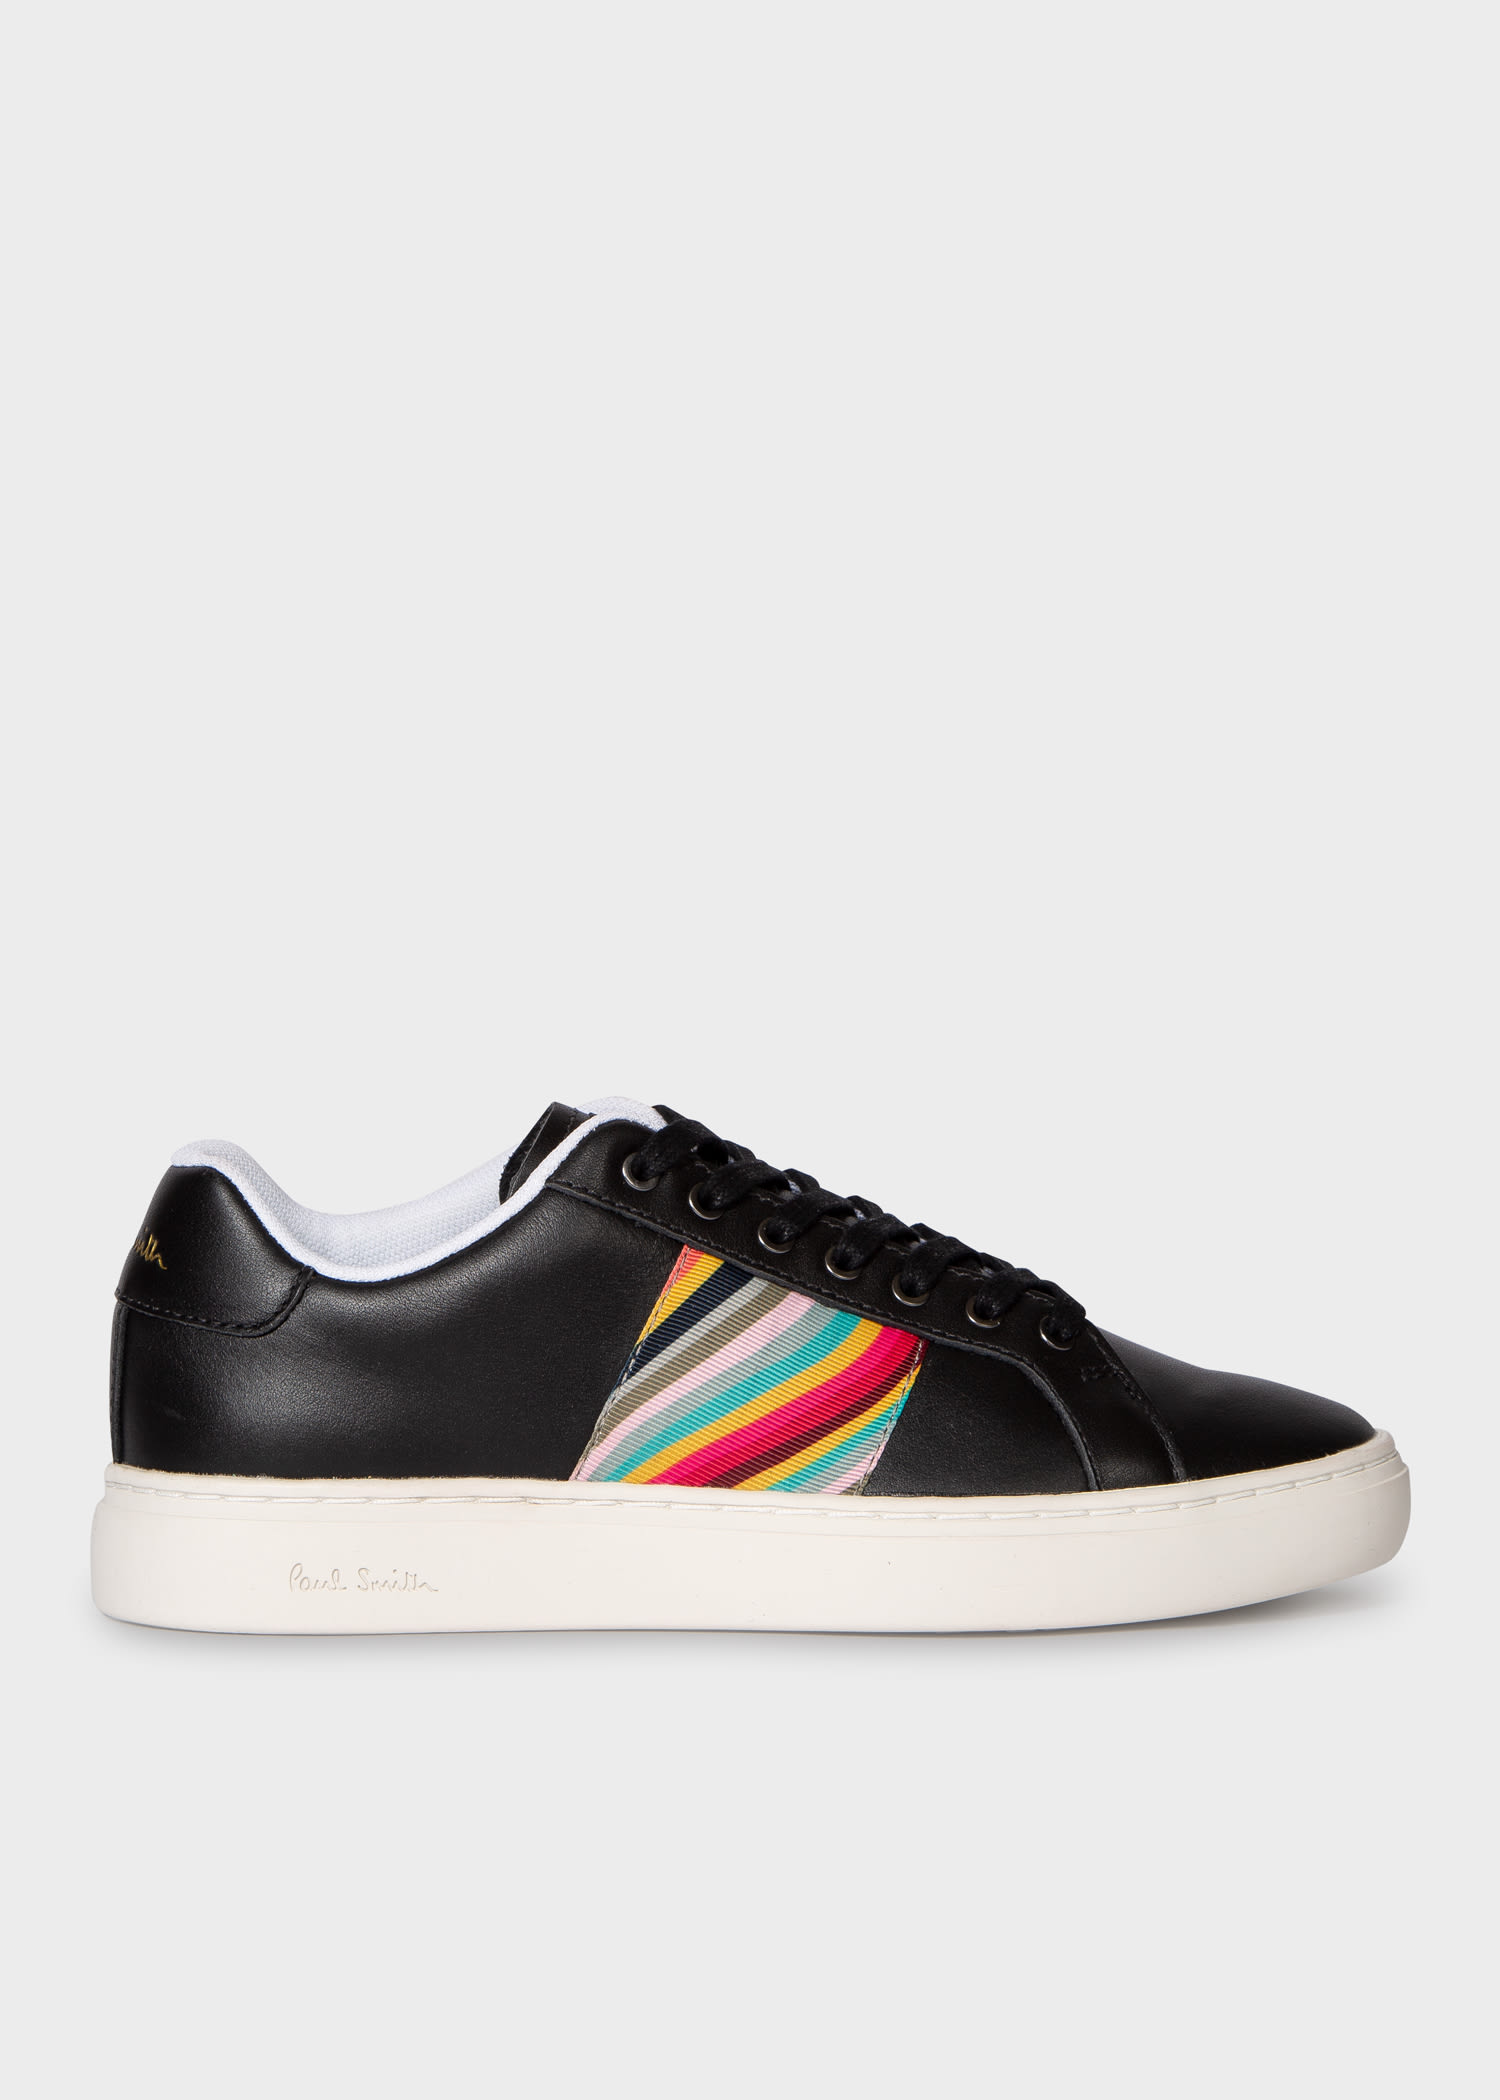 Paul Smith Sneakers lapin trainer black 